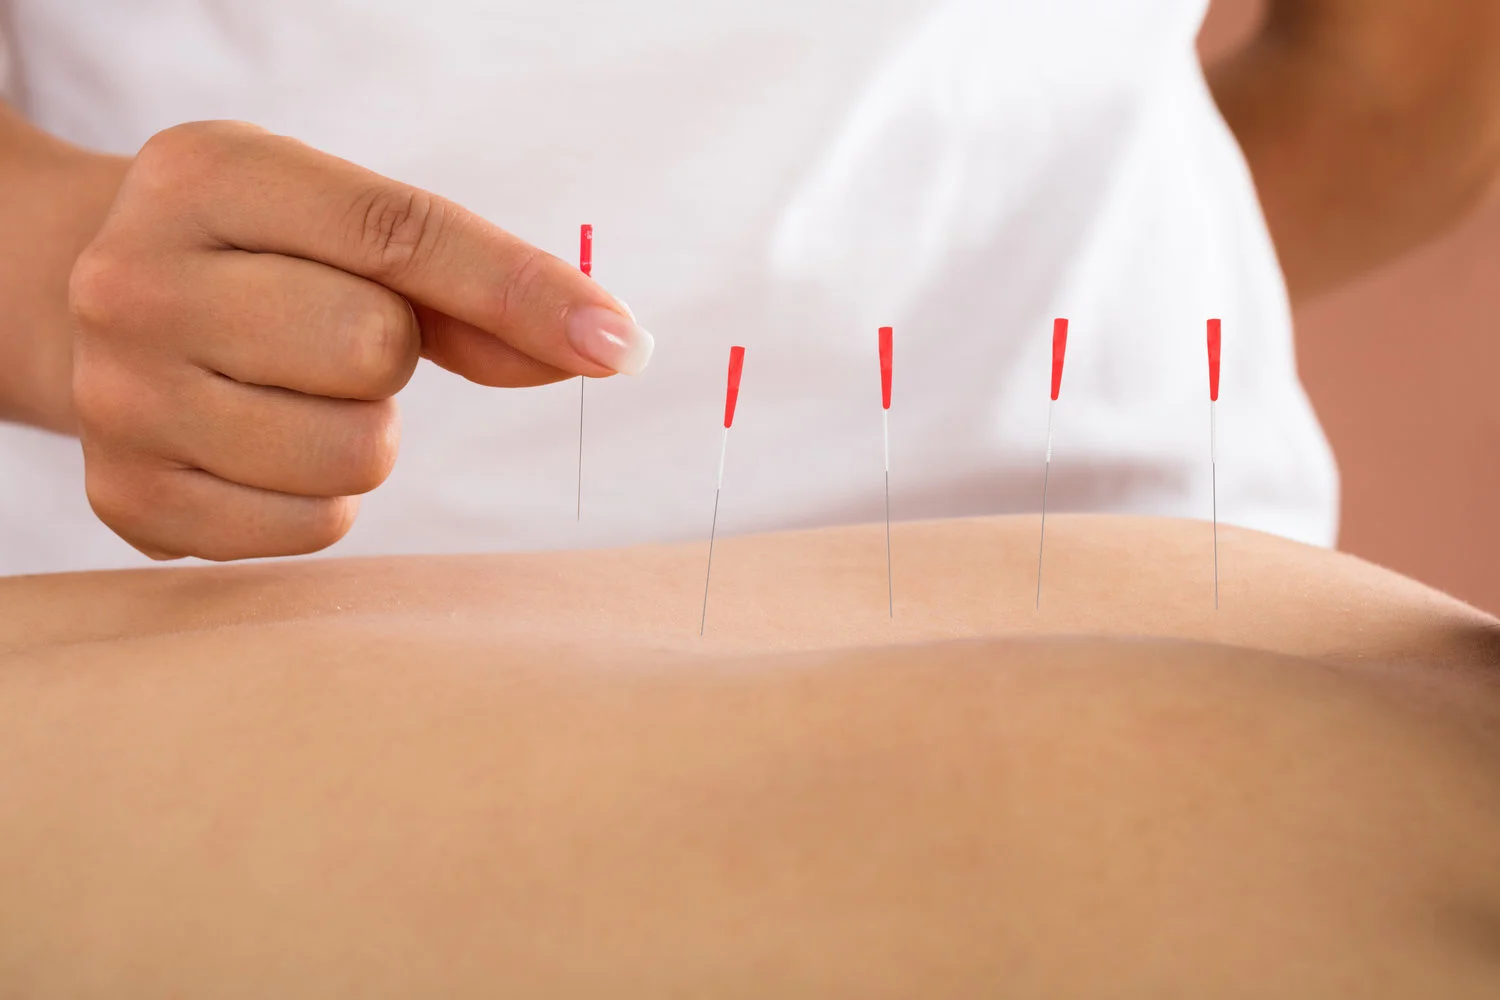 Dry needling is the process of inserting a hypodermic needle into the body without injecting any substance. In certain cases, ultrasound-guided dry needling is necessary to identify damaged parts, such as tendons.